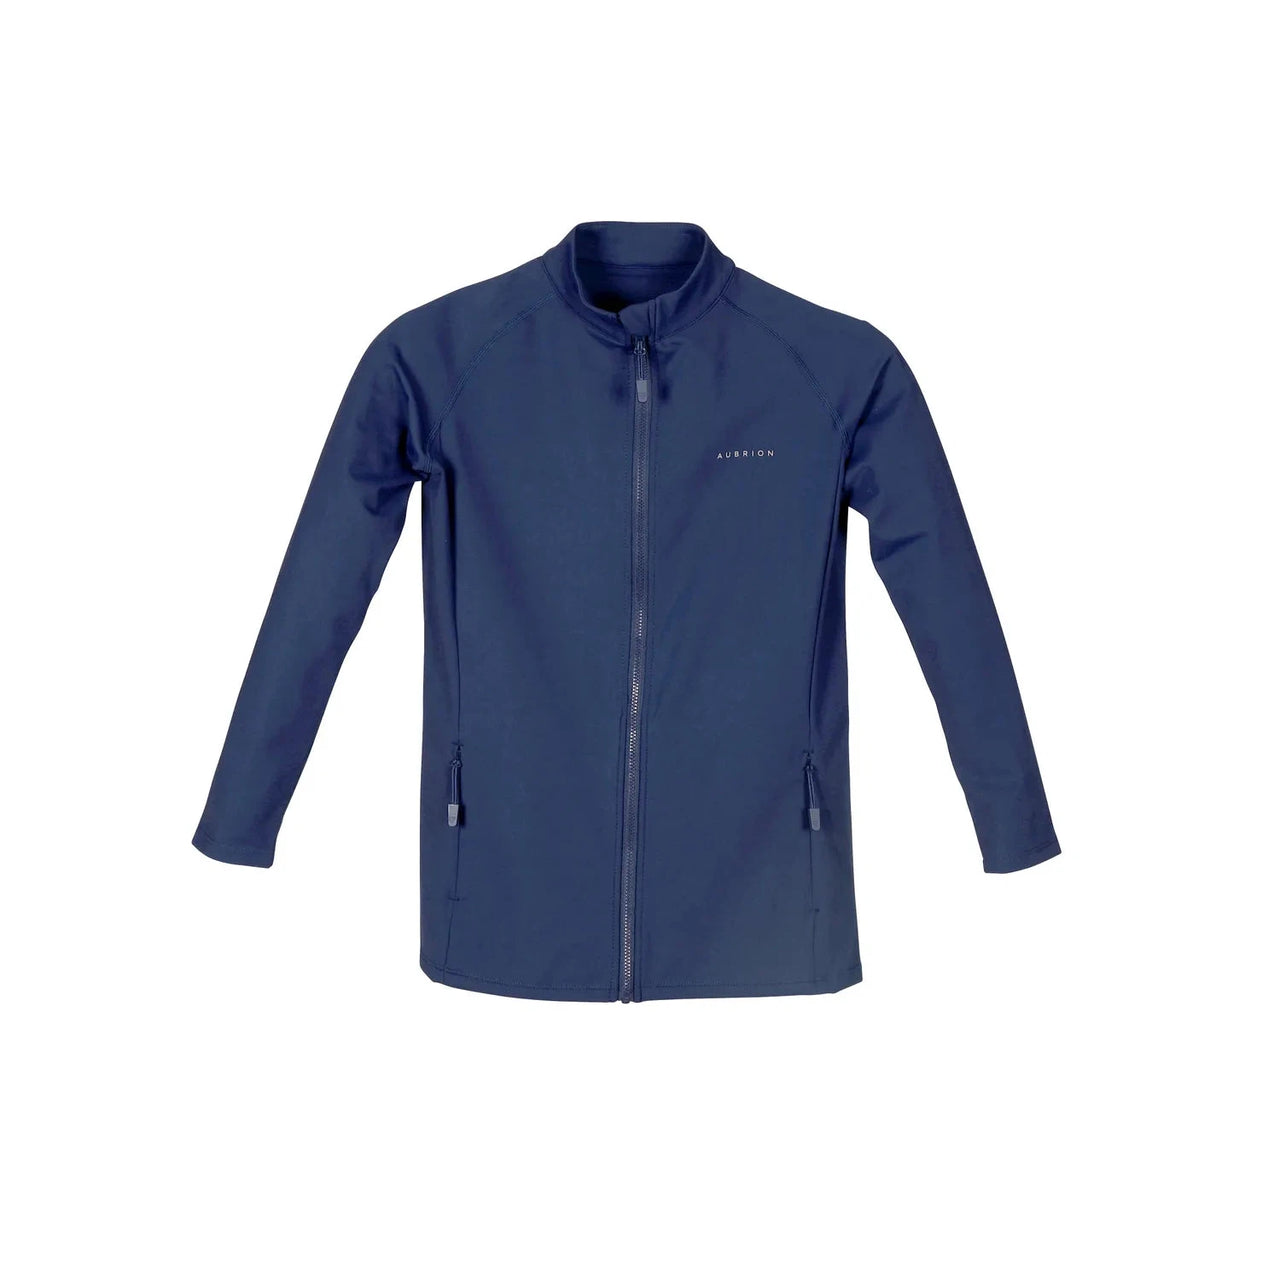 Aubrion Young Rider Non-Stop Jacket - Ink